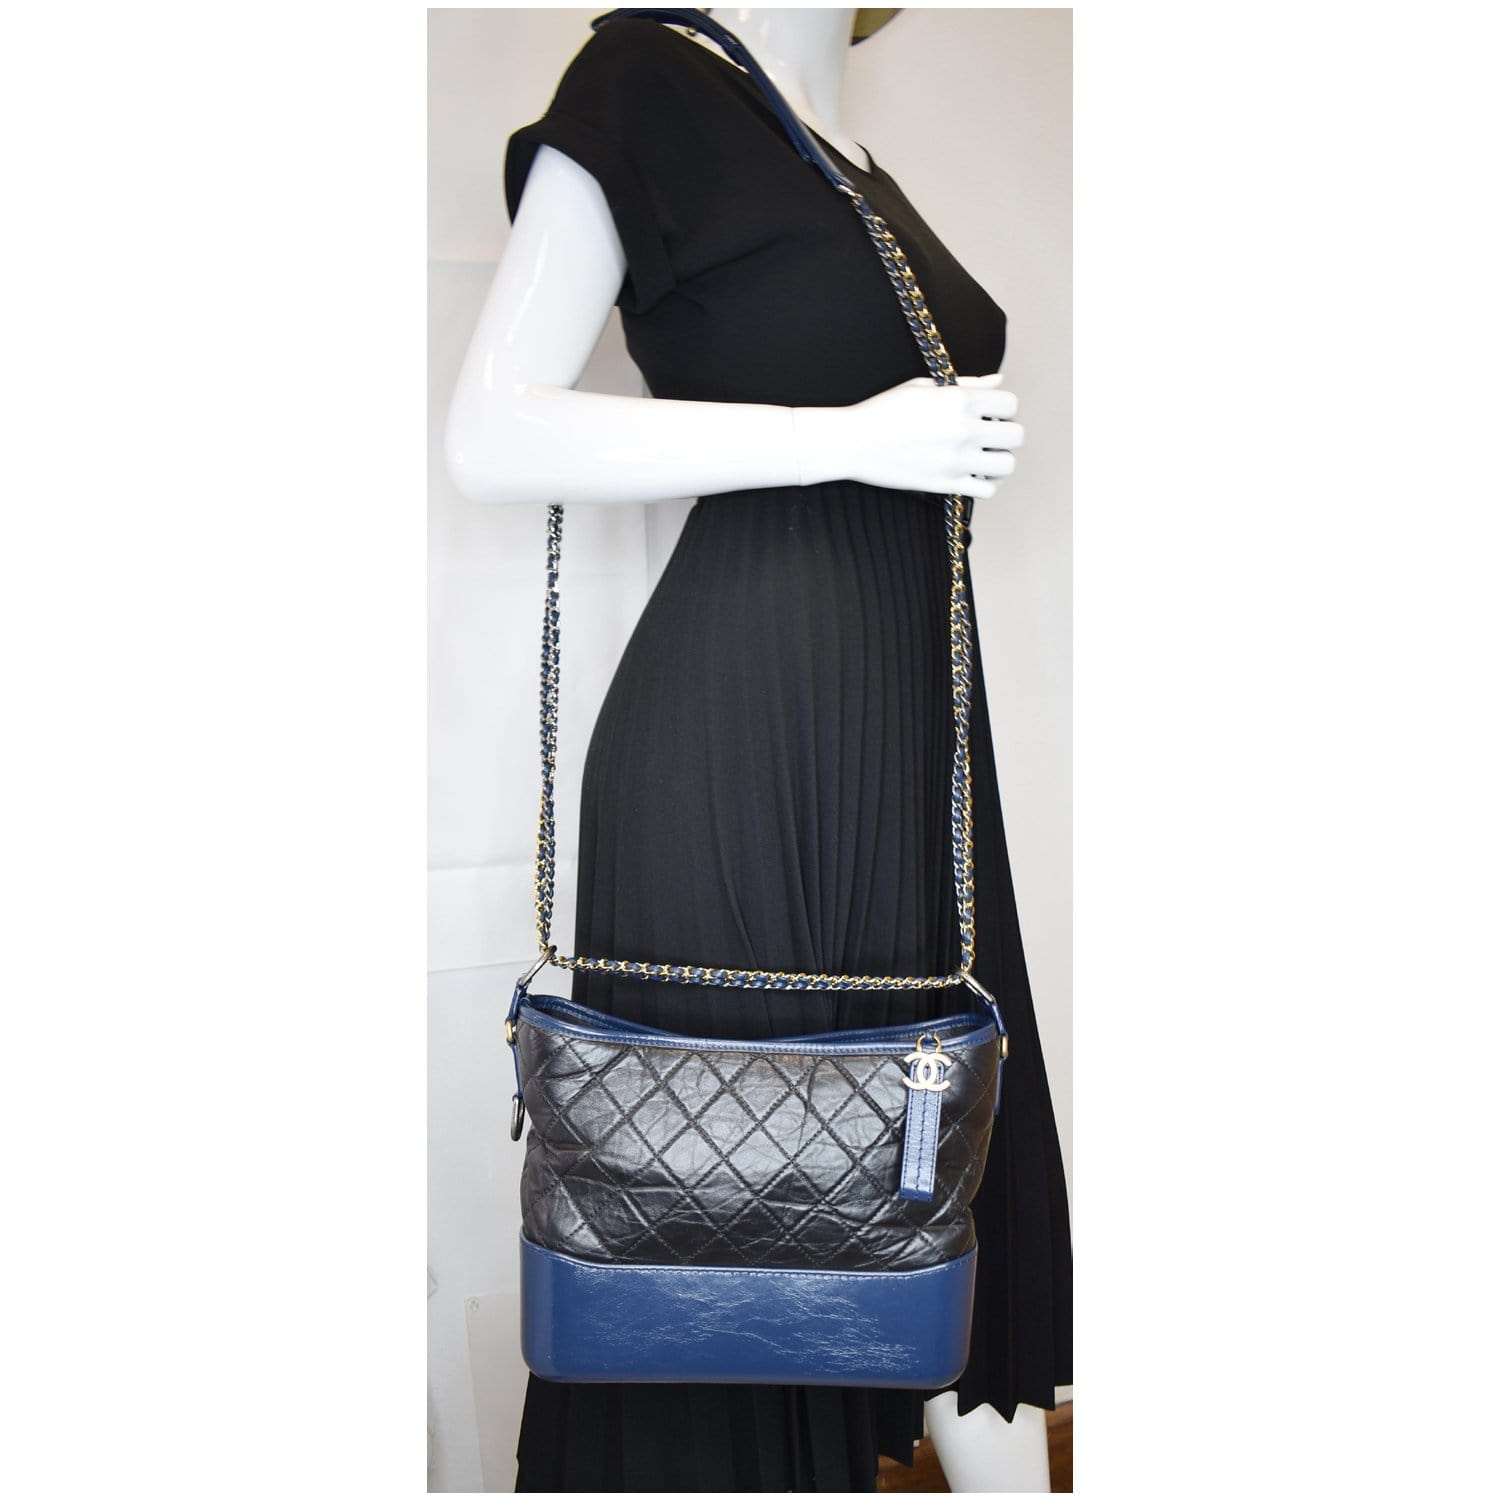 CHANEL blue leather TWEED GABRIELLE HOBO Shoulder Bag at 1stDibs  chanel  gabrielle bag tweed chanel blue tweed bag chanel gabrielle blue